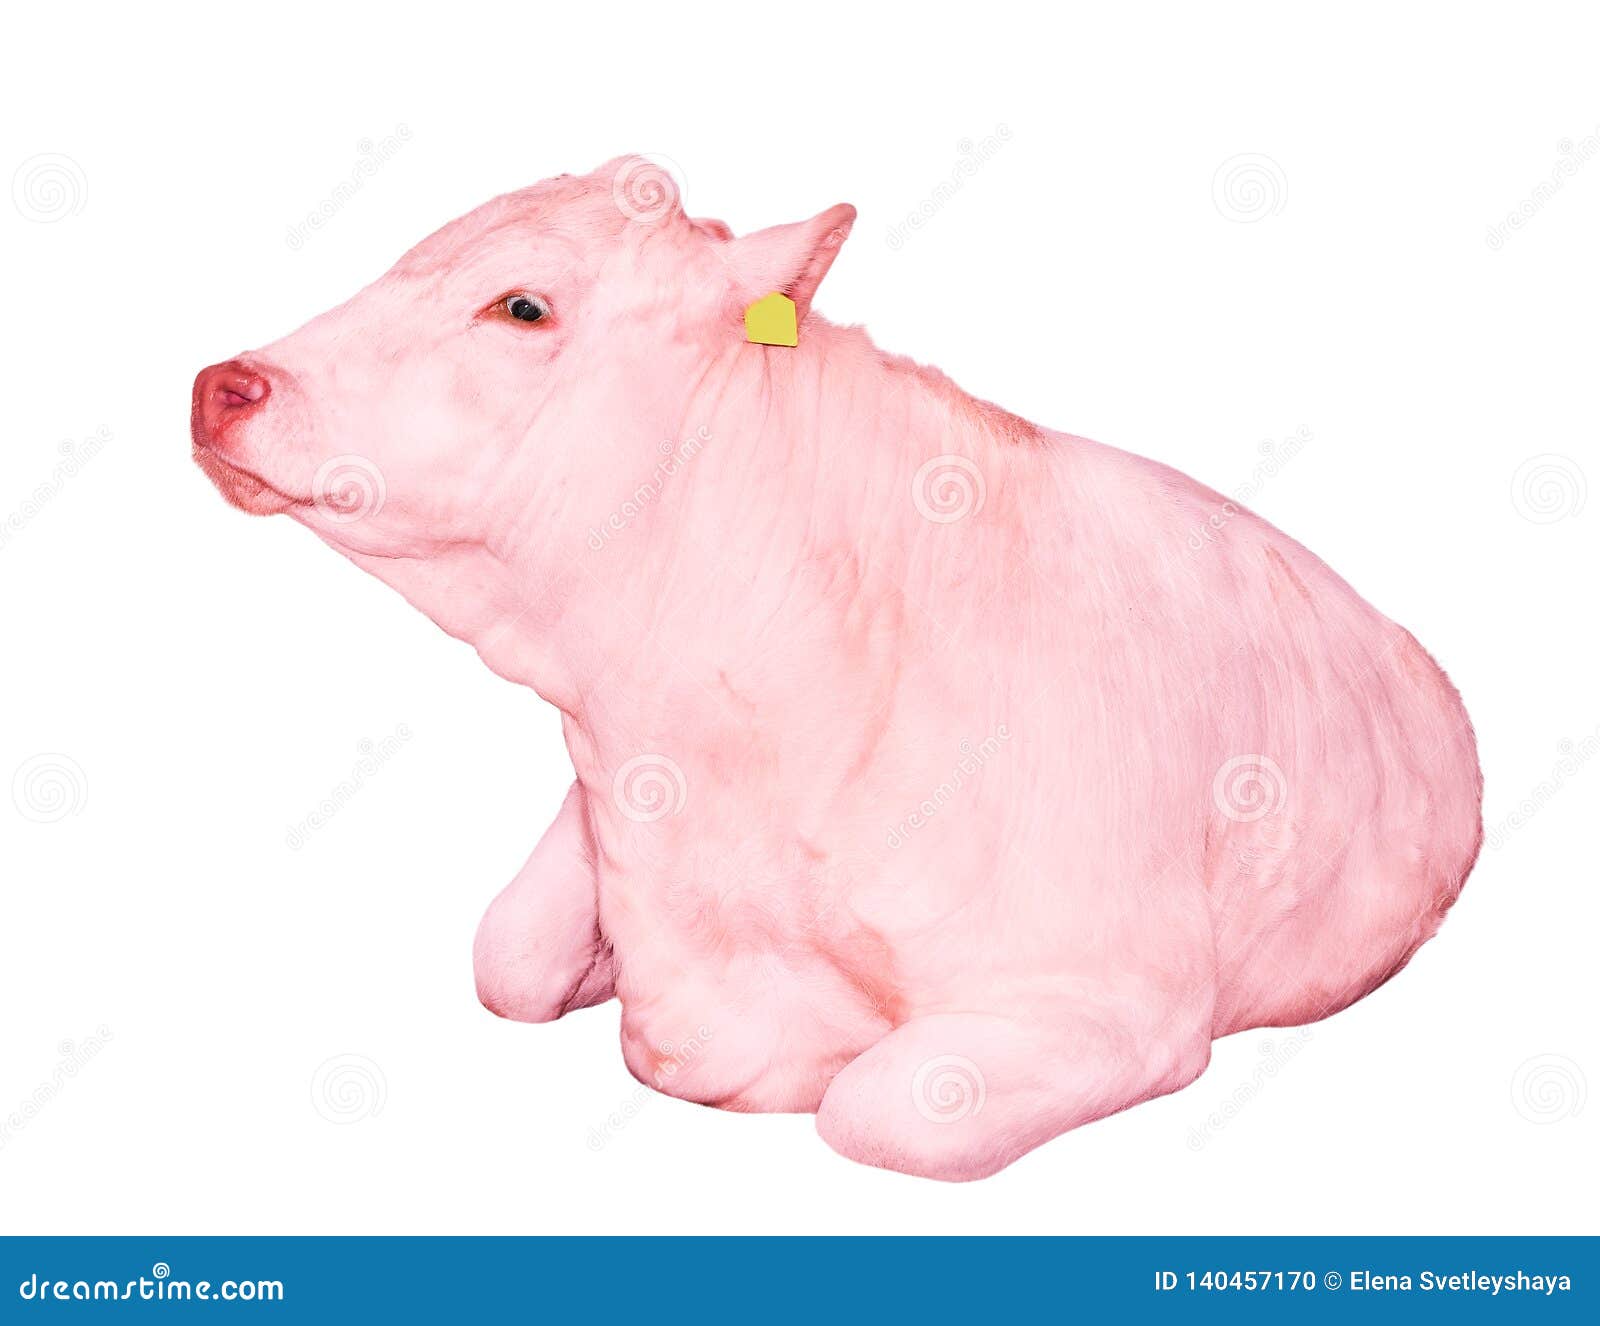 Pink Cow Lying Isolated on a White Background. Big White Funny Cow